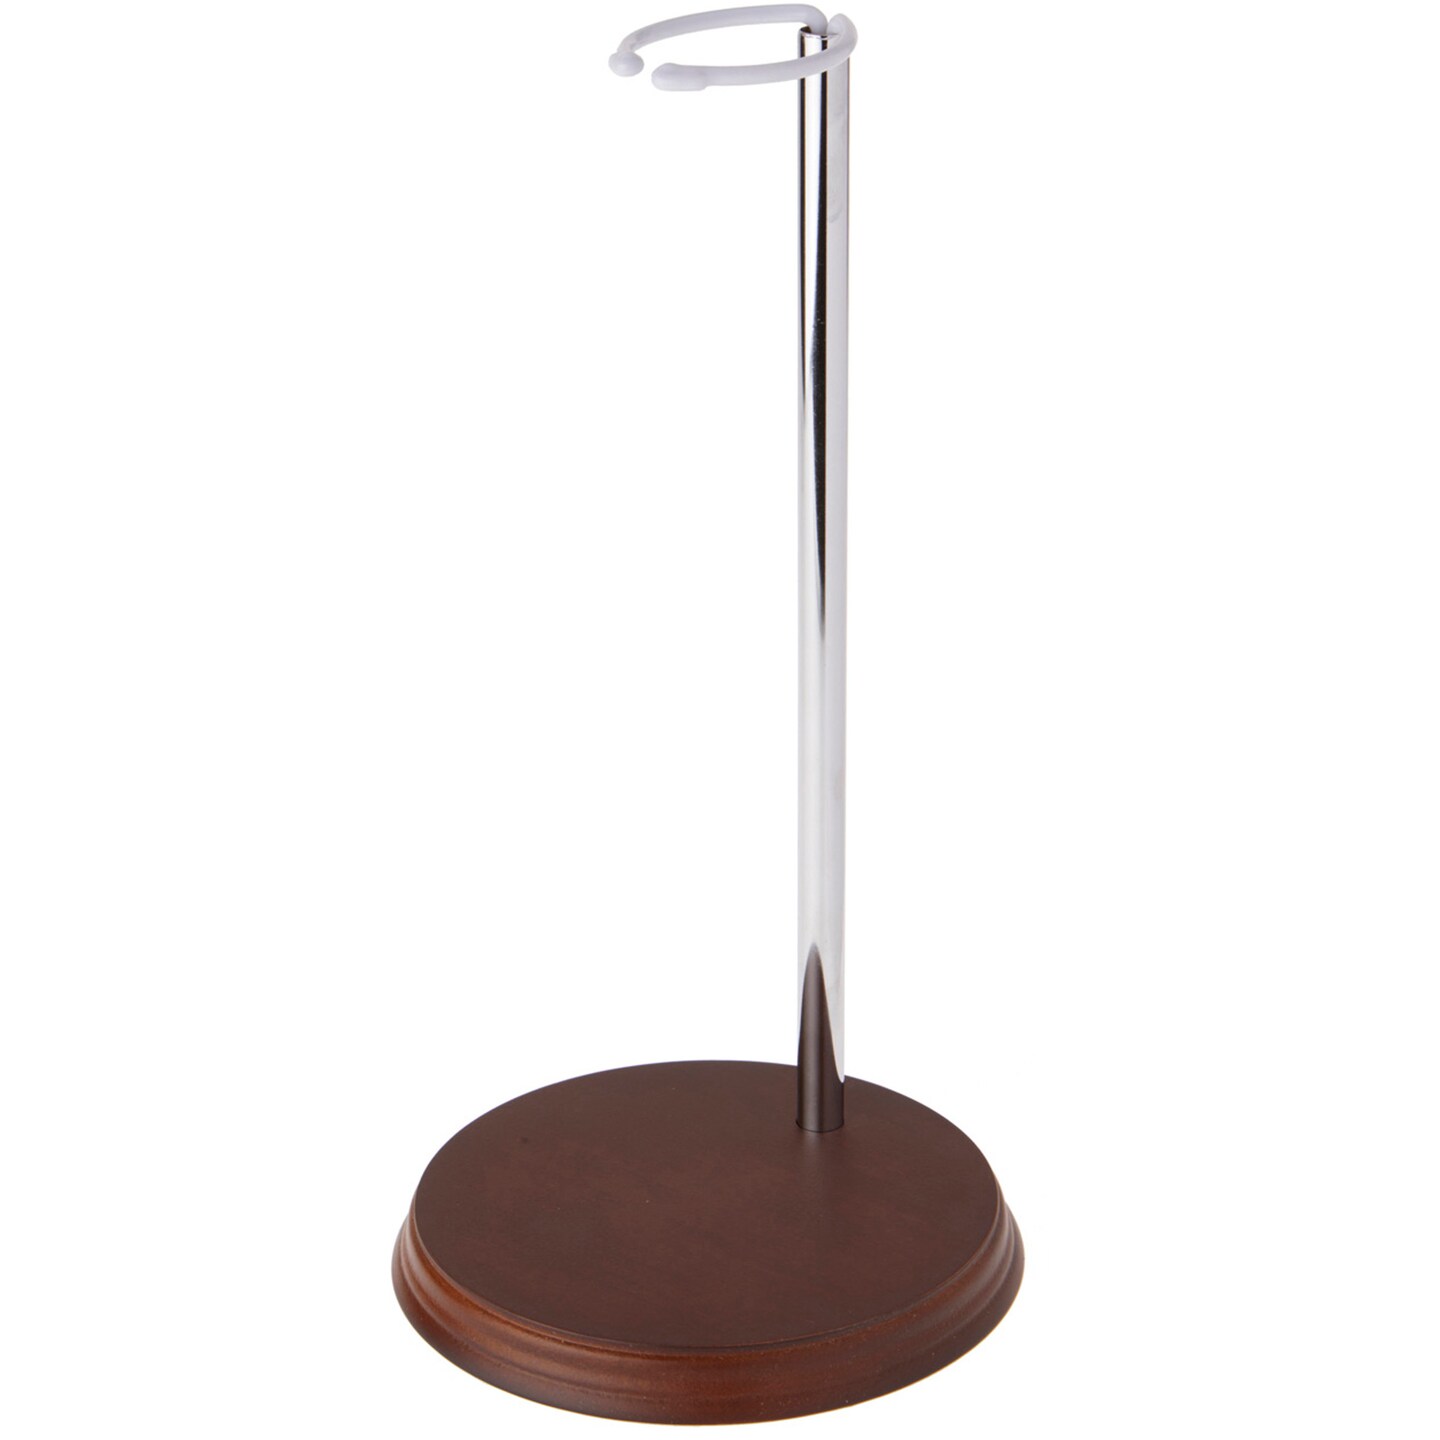 Bard&#x27;s Chrome and Wood Doll Stand, Fits 20 to 30 inch Slim Waist Dolls, Waist is 1.75 to 2.25 inches Wide